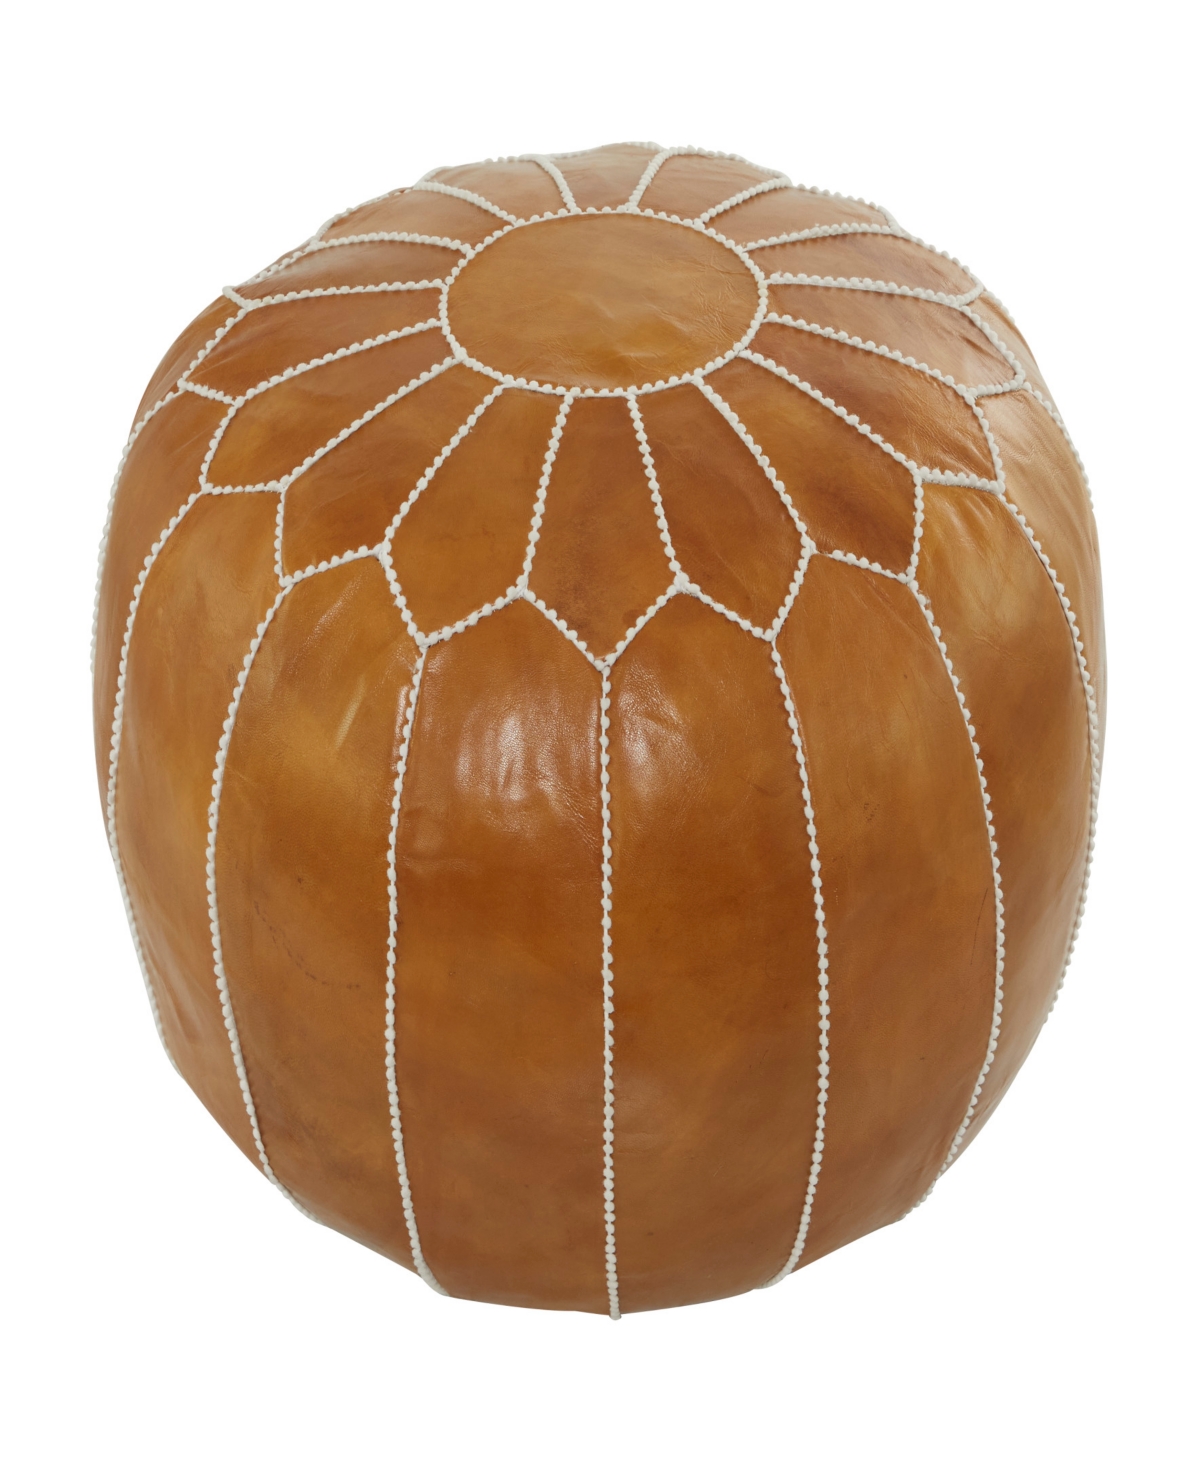 Rosemary Lane 24" X 24" X 18" Leather Moroccan Floral Stitching Pouf In Light Brown